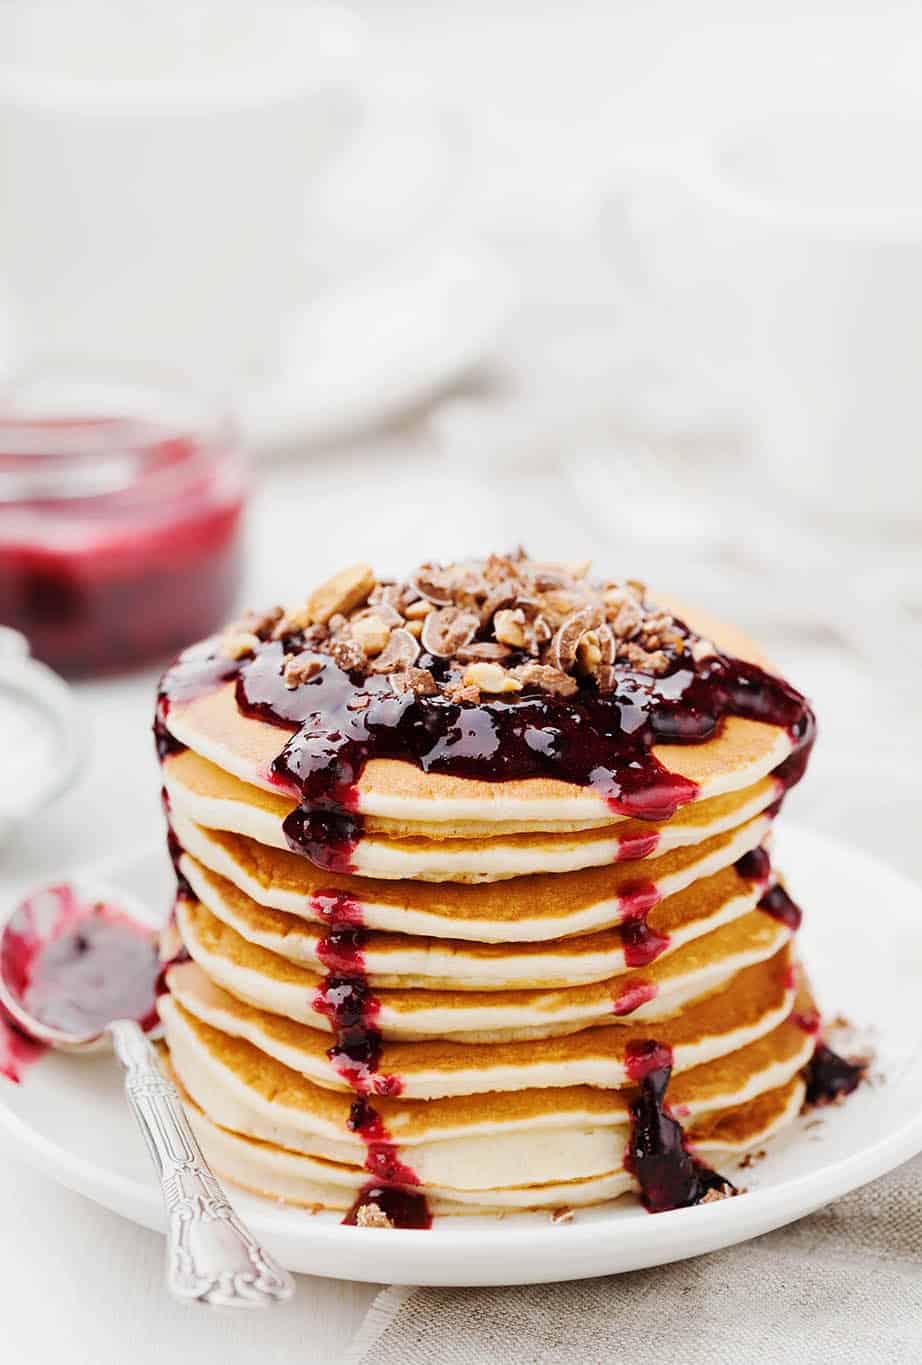 Pancakes on a light coloured table setting with a stack of pancakes with dripping red berry sauce 